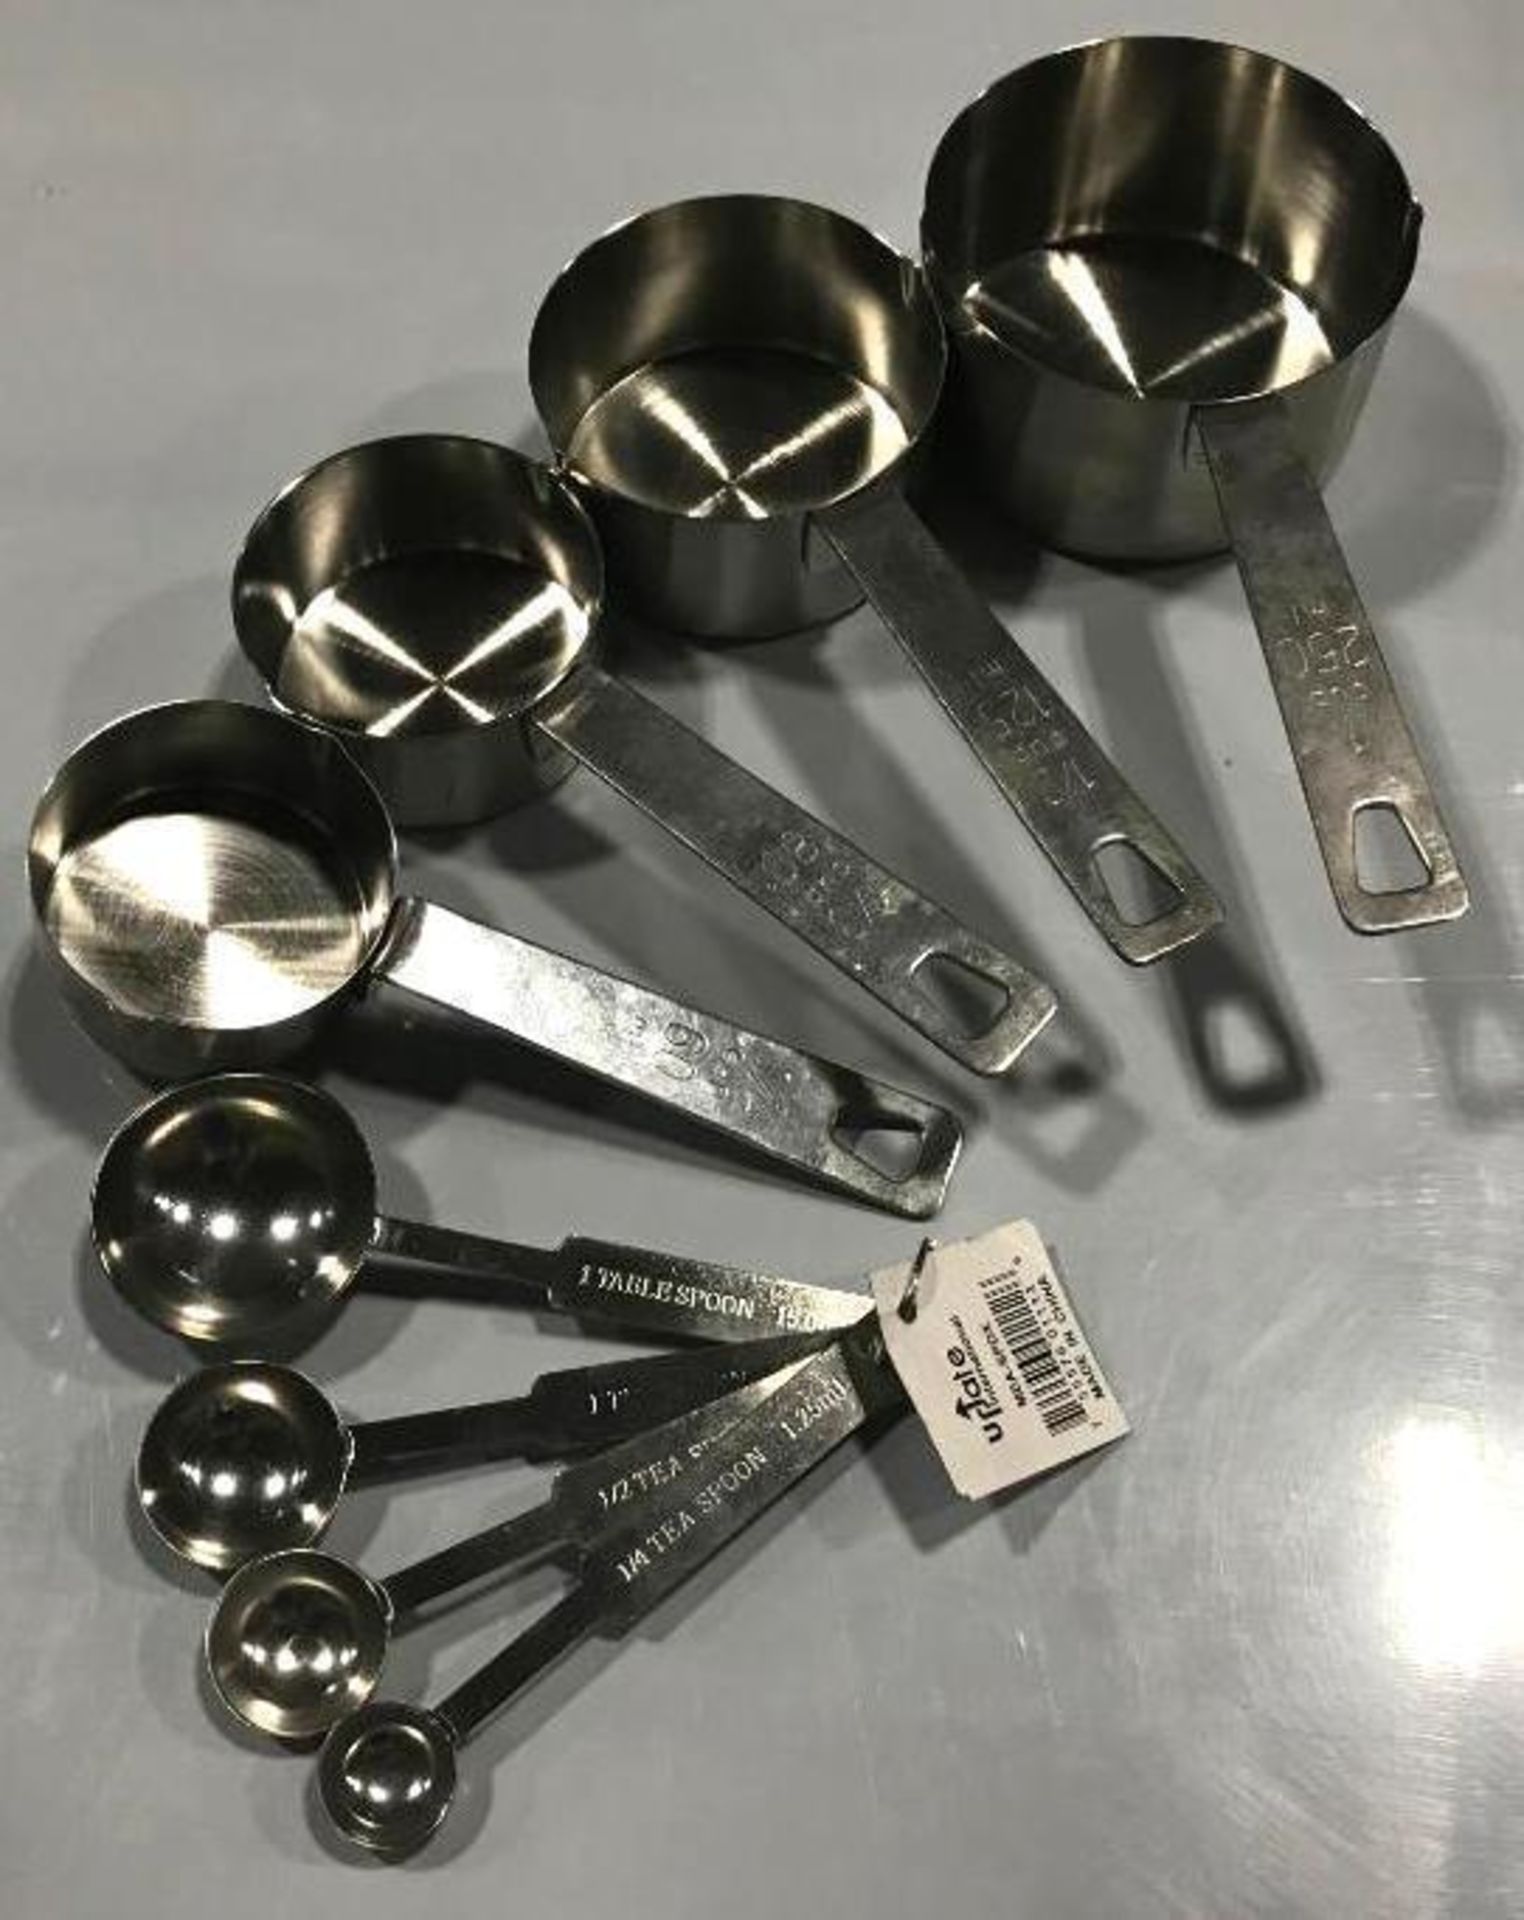 UPDATE STAINLESS STEEL MEASURING CUPS SET OF 4 & UPDATE MEASURING SPOONS SET OF 4 - NEW - Image 2 of 3